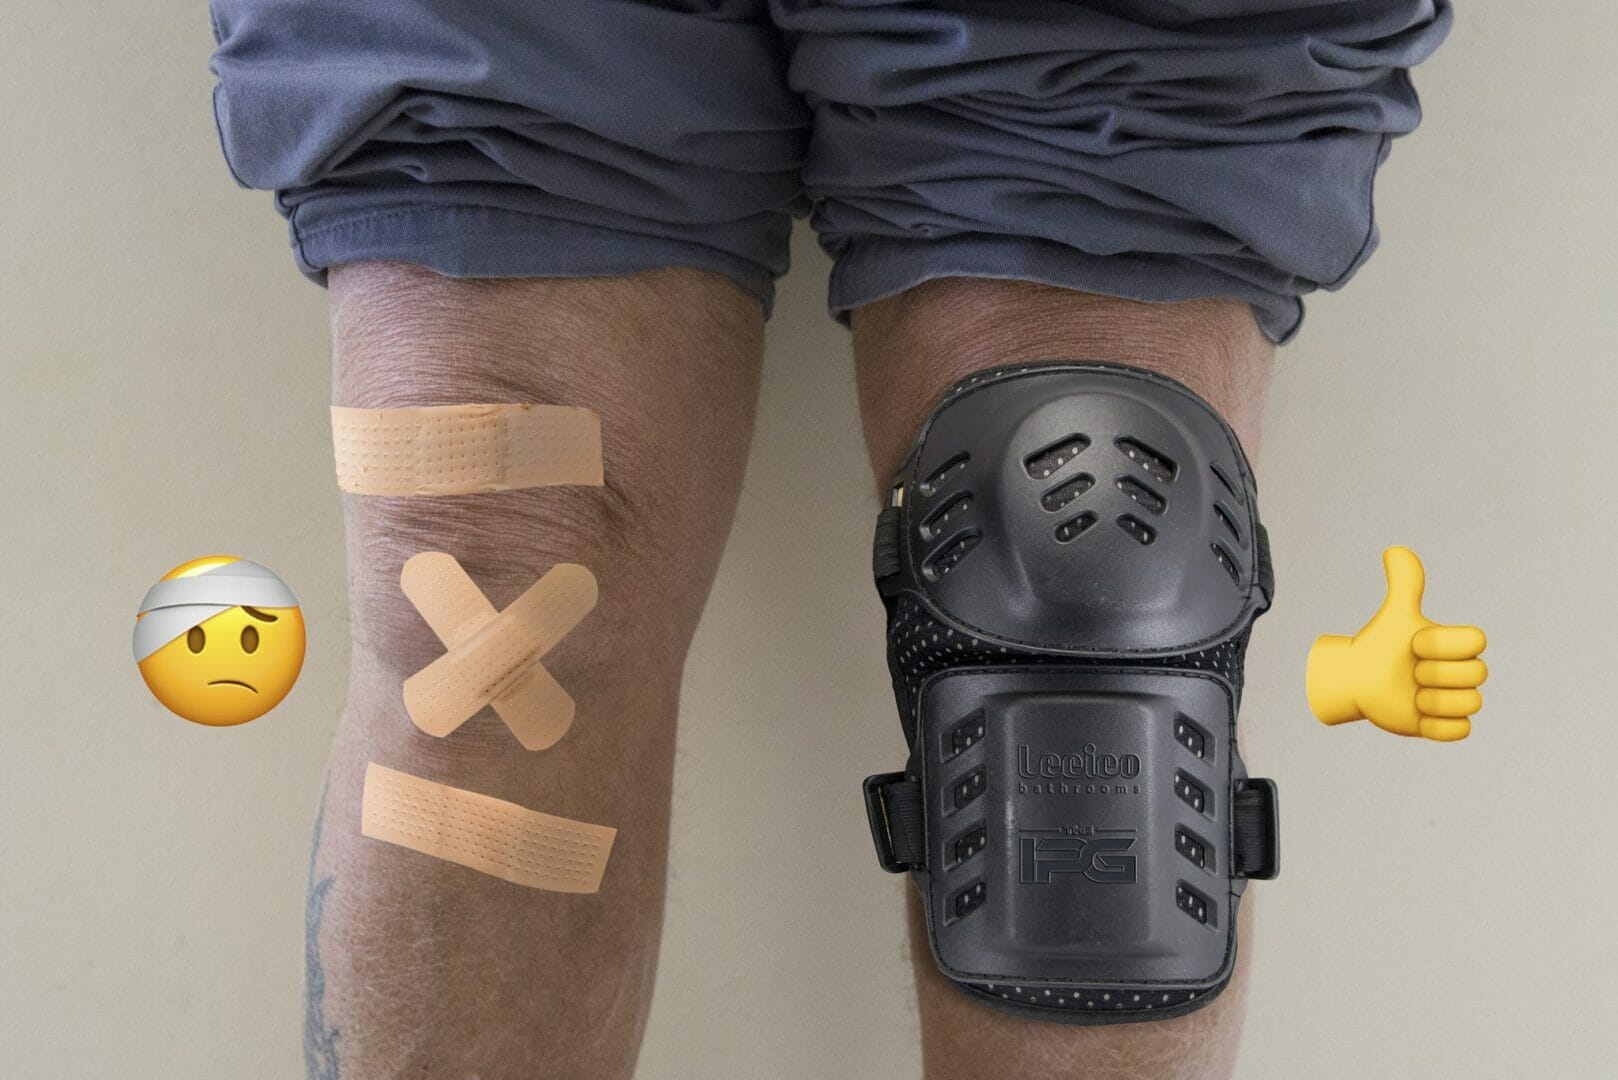 The IPG to give away 25 knee pads to help battle ‘The Problem of Plumber’s Knees’